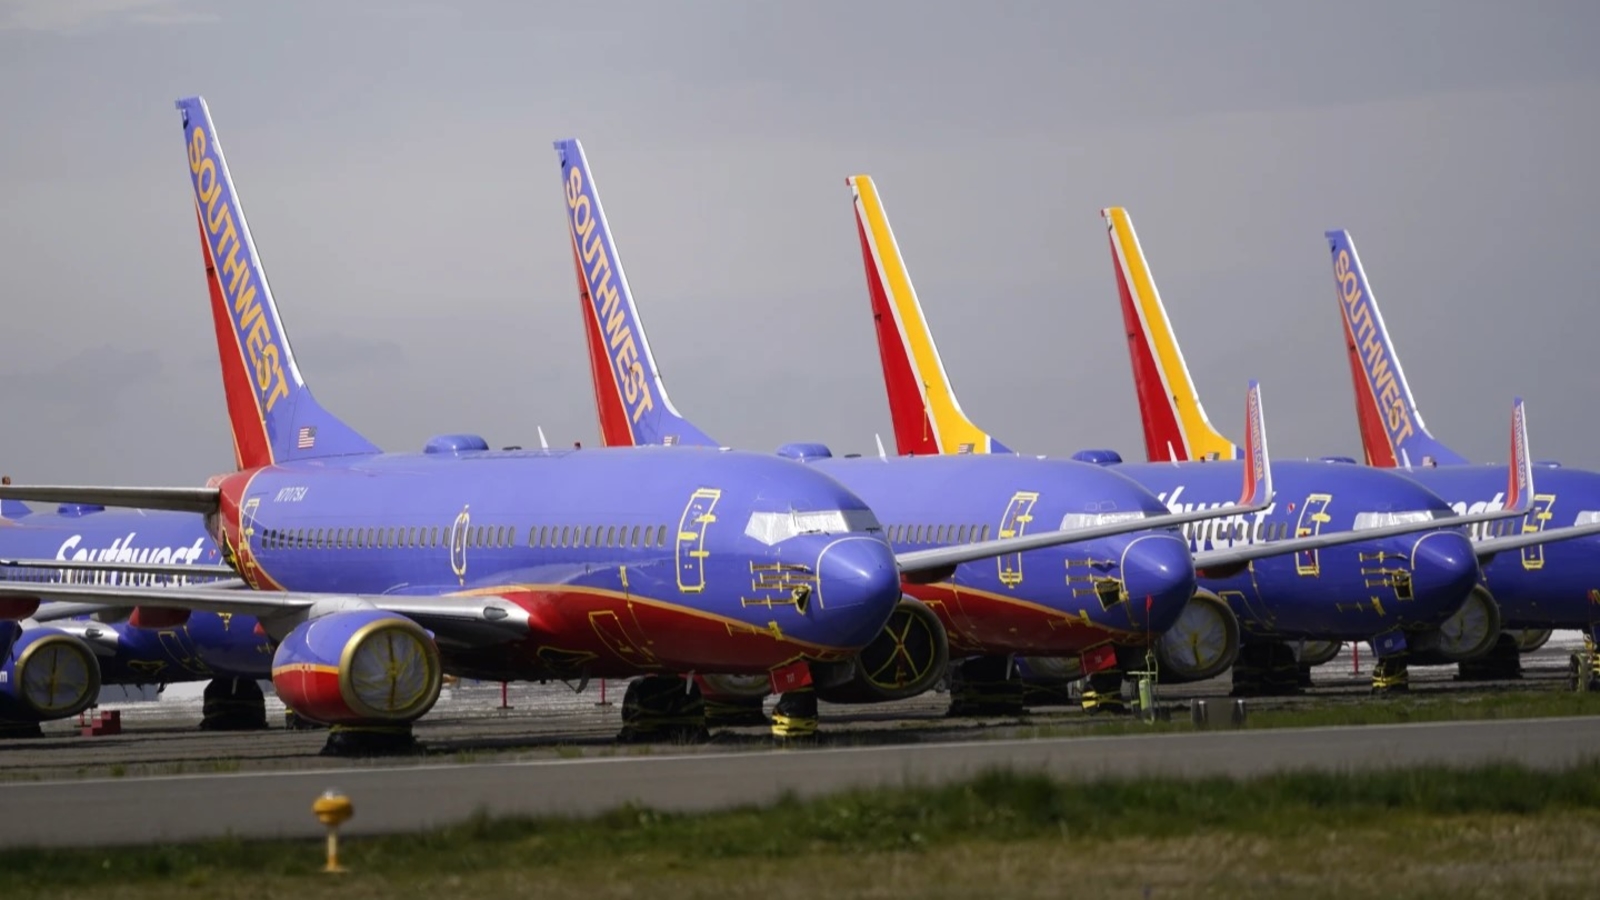 Southwest Airlines will no longer fly out of Houston’s Bush Airport and 3 other airports after financial lows and Boeing delays [Video]